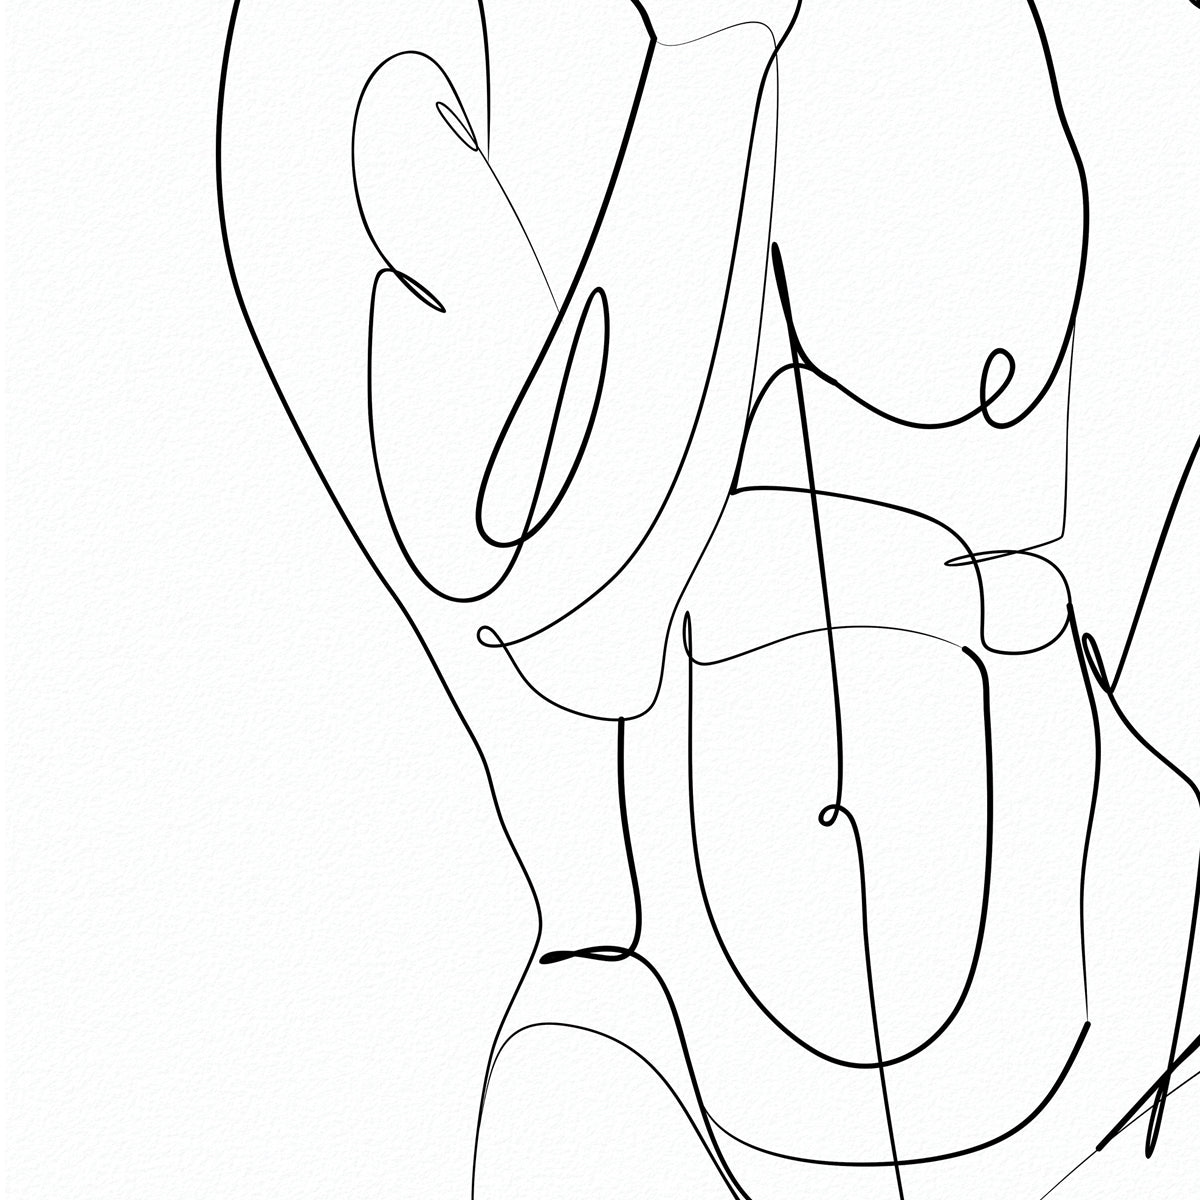 Intimate Whisper - One-Line Art of a Male Couple's Embrace - Giclee Art Print